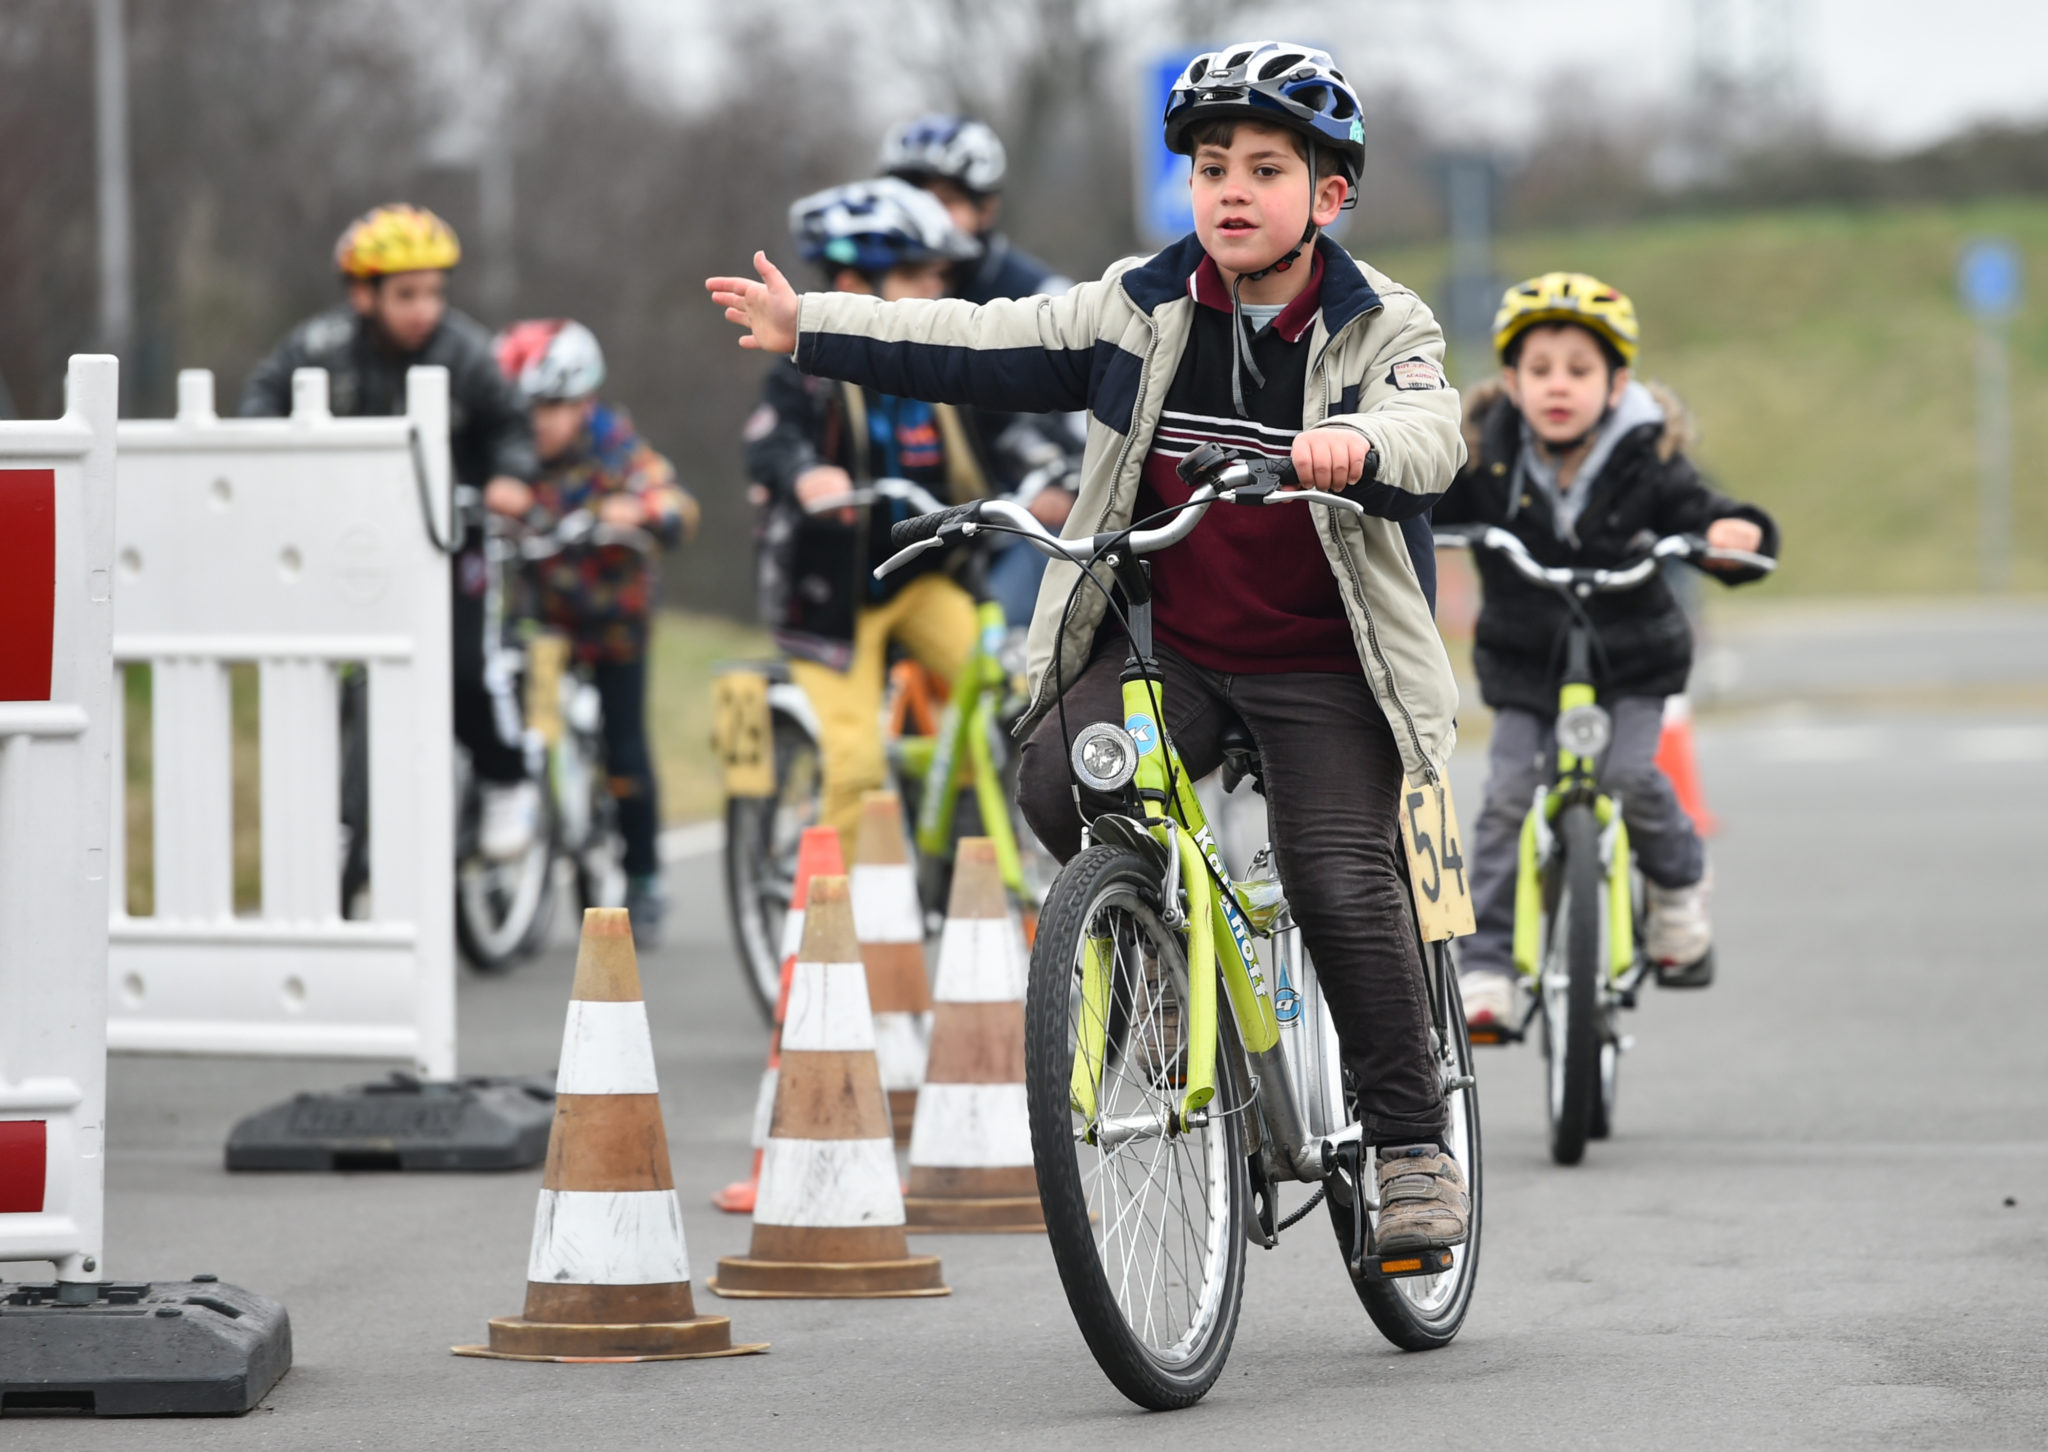 Children practice safe cycling at the youth traffic school in Mannheim, Germany cycleways